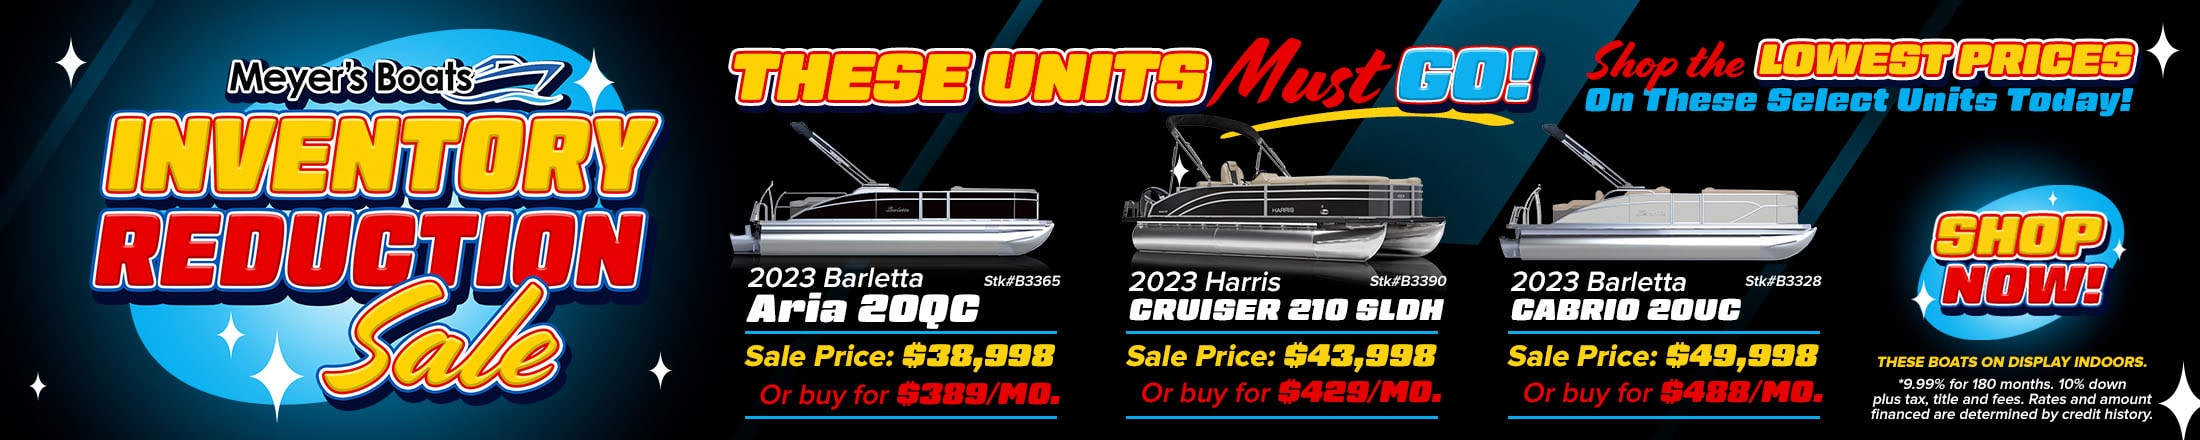 Boat Inventory Reduction Sale